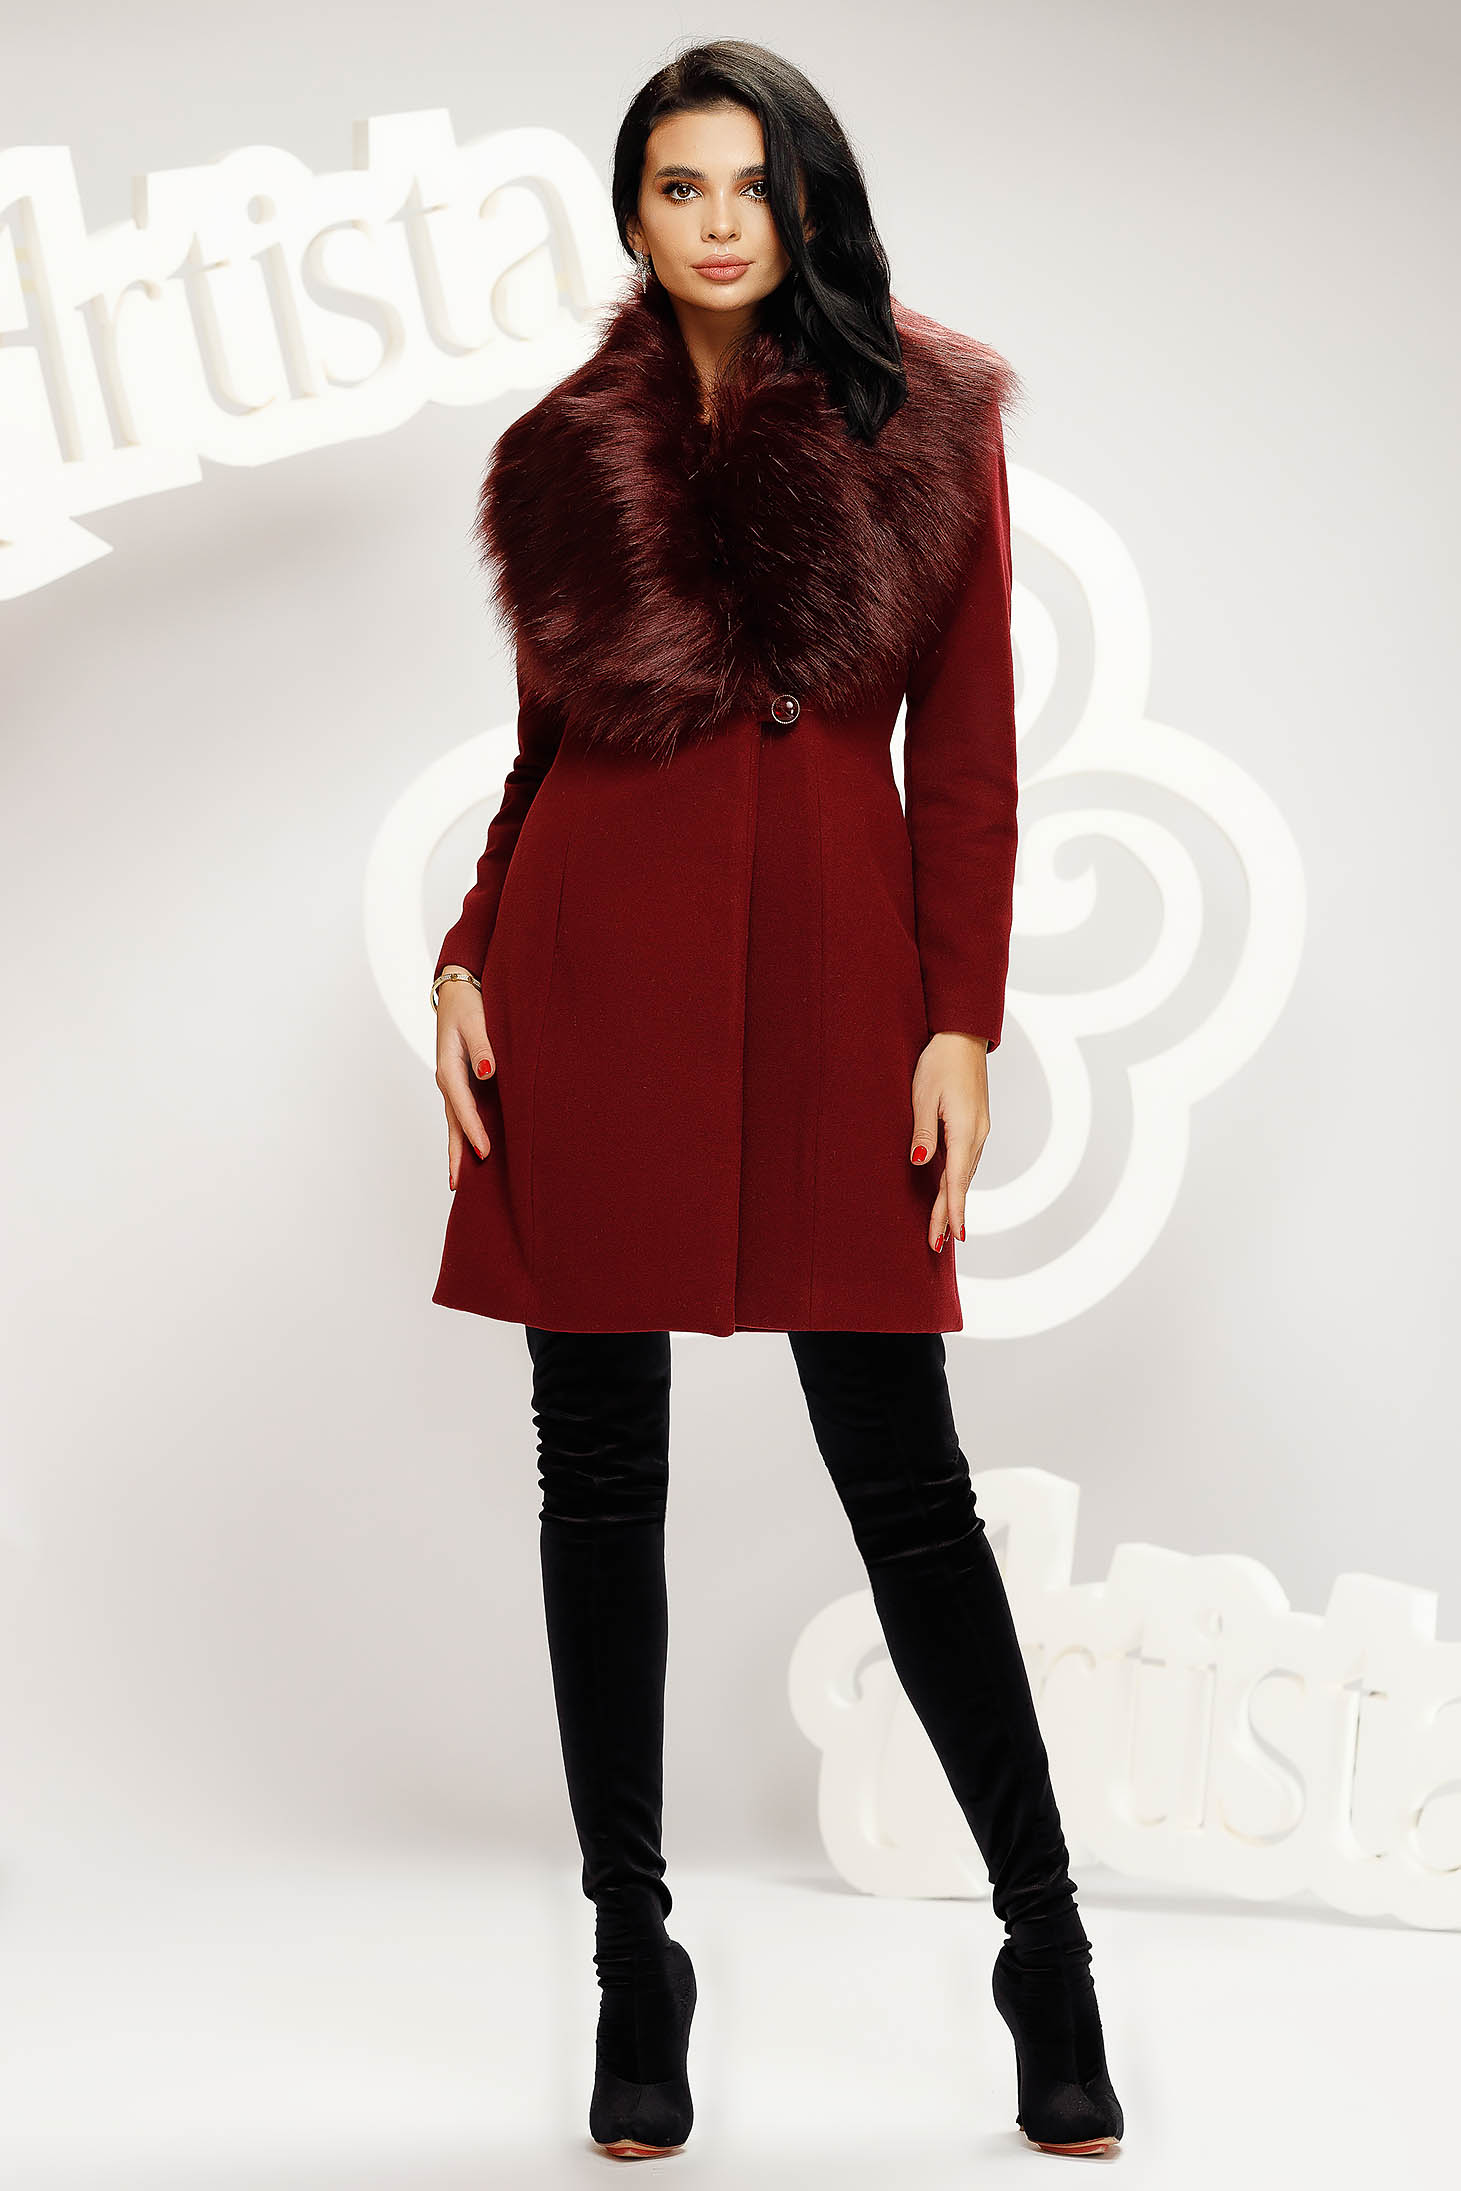 Burgundy coat tented with faux fur accessory cloth